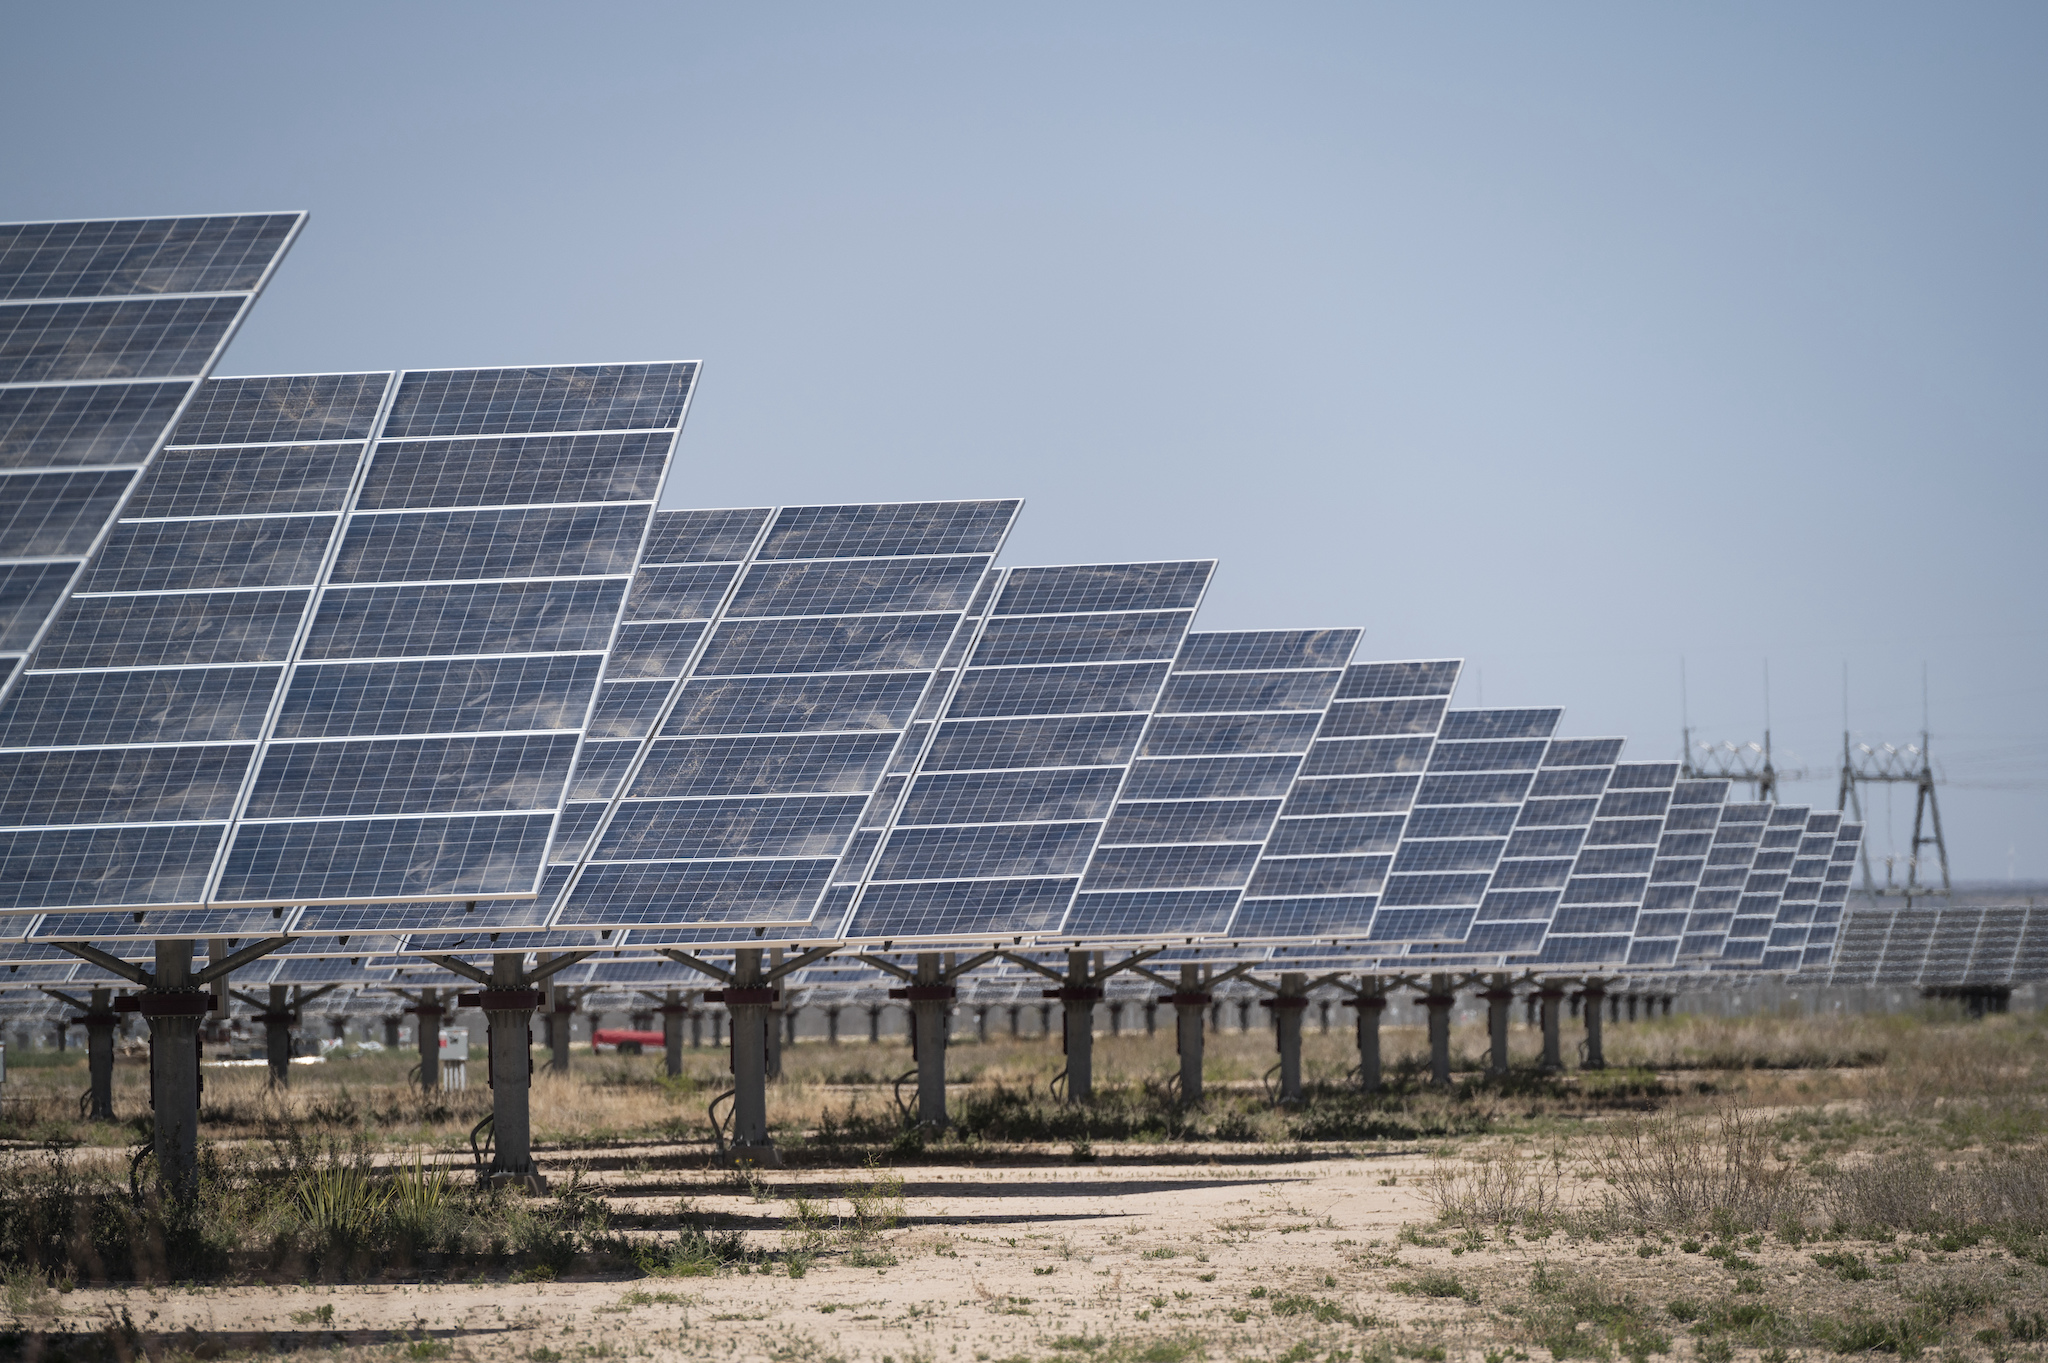 Row upon row of solar panels installed in the scrubby Texas desert, angled to catch the maximum amount of sunlight.